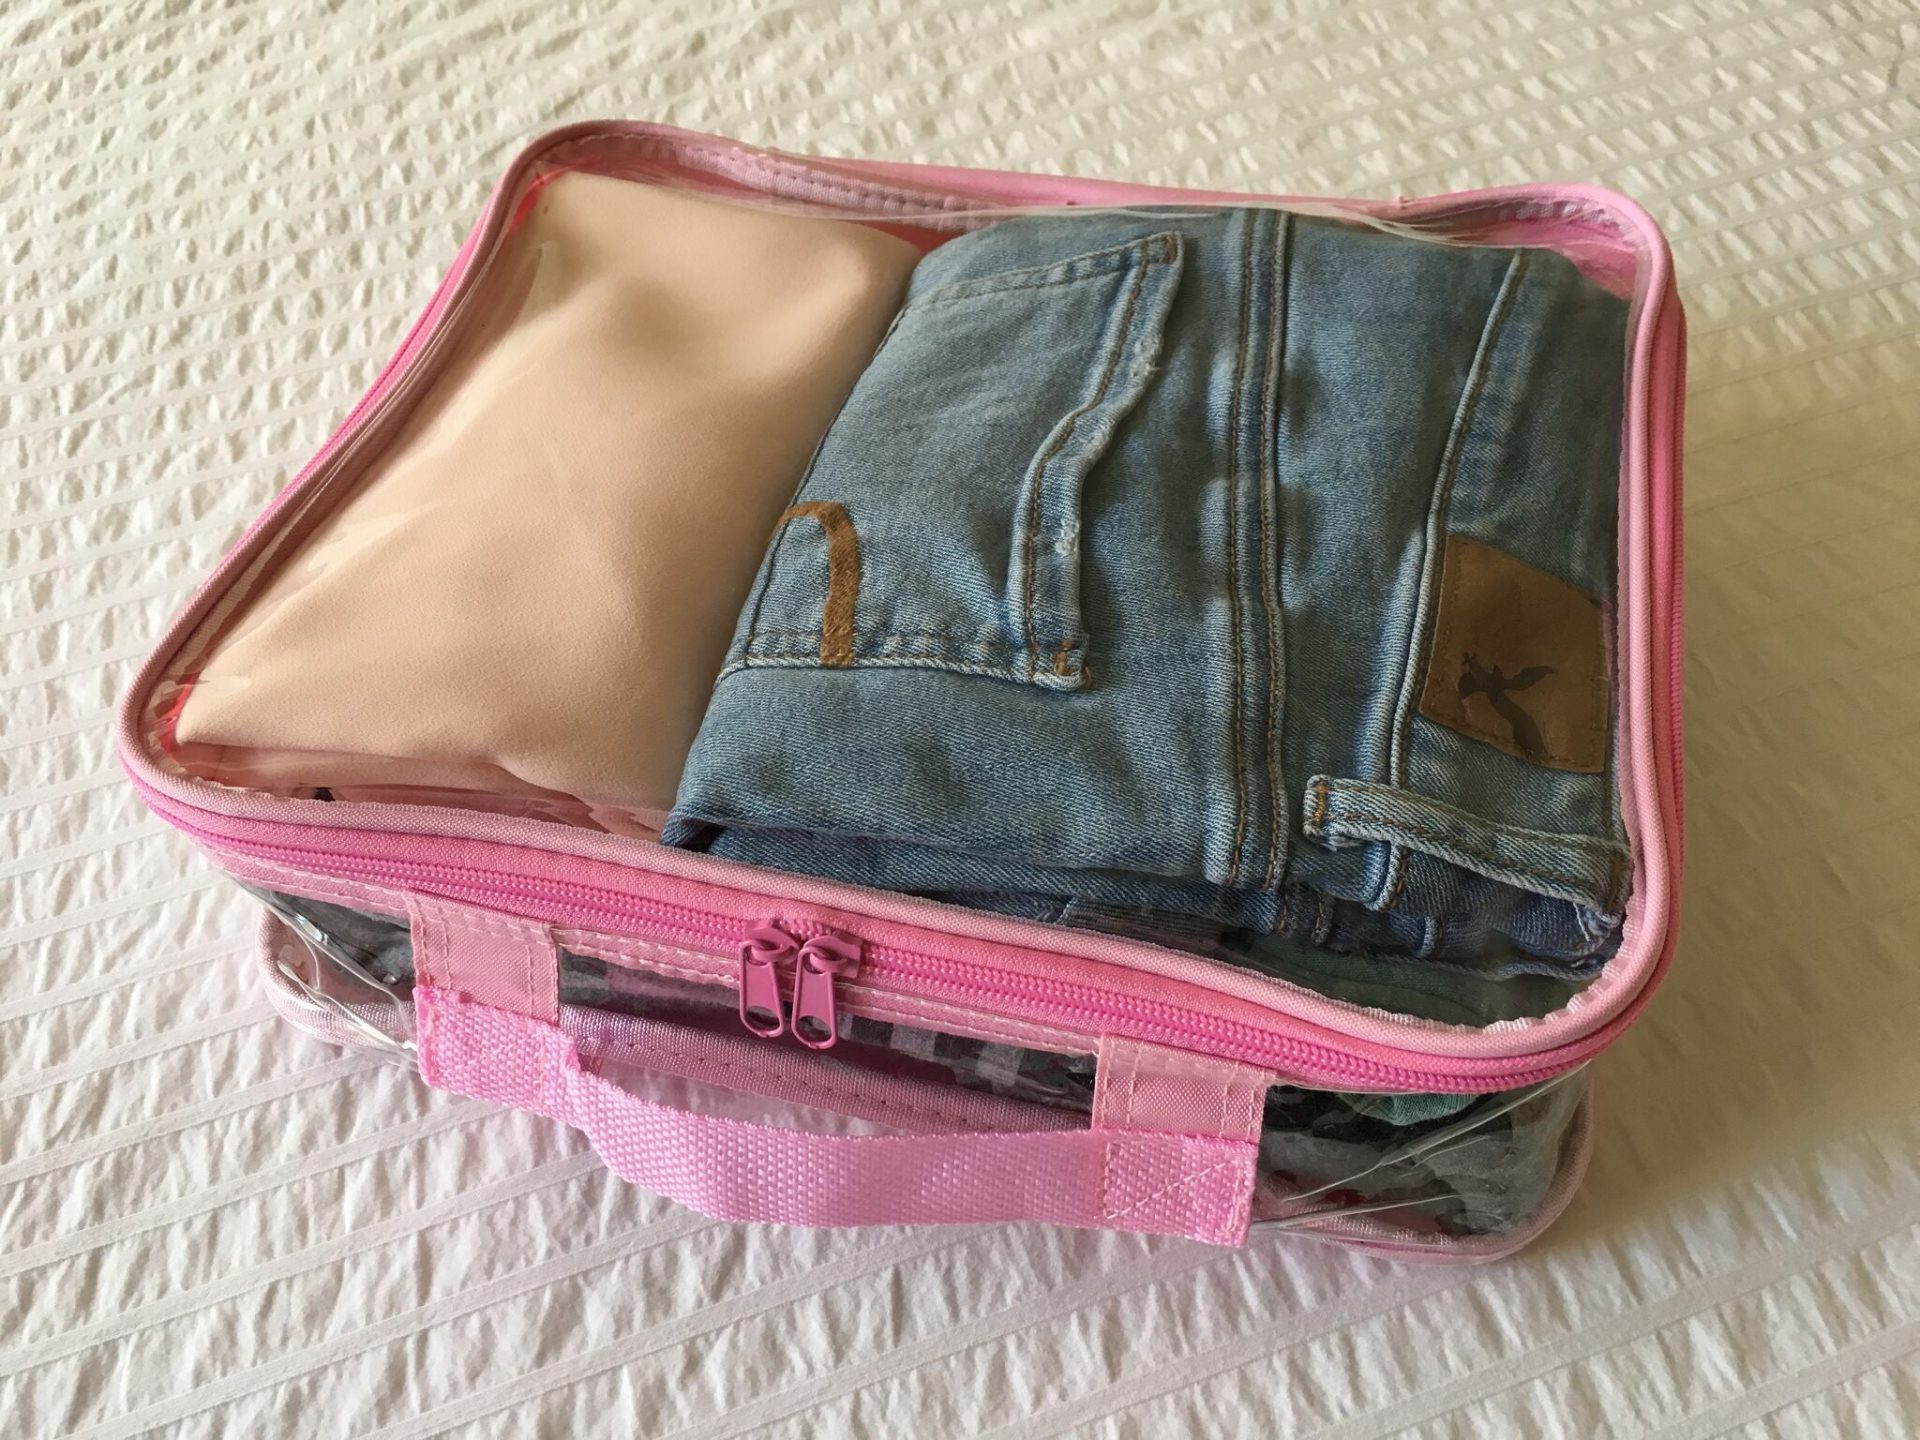 Bulky clothes packed inside a large cube